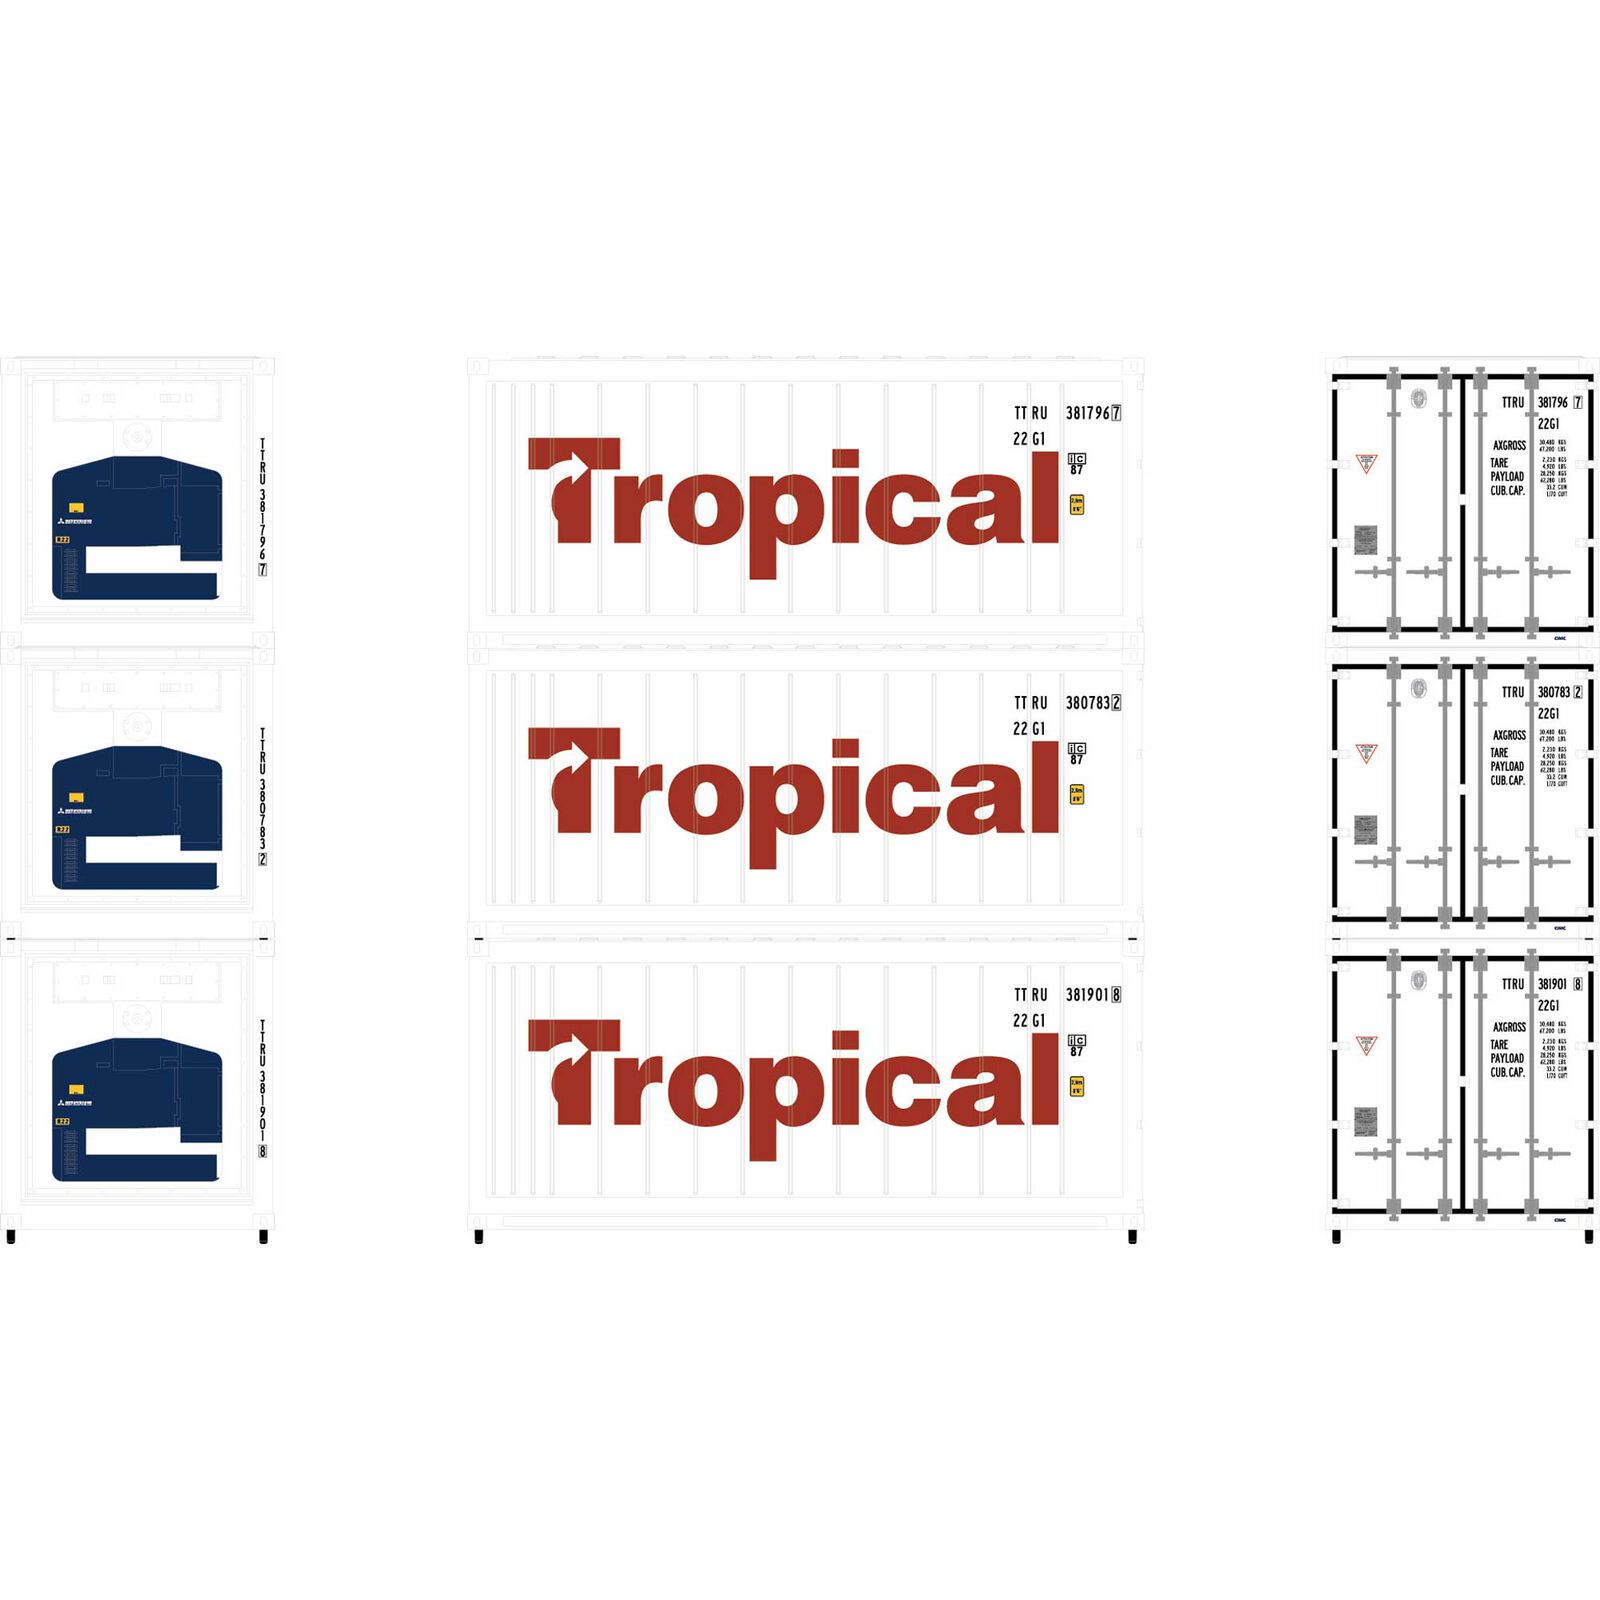 N 20' Reefer Container Tropical (3)